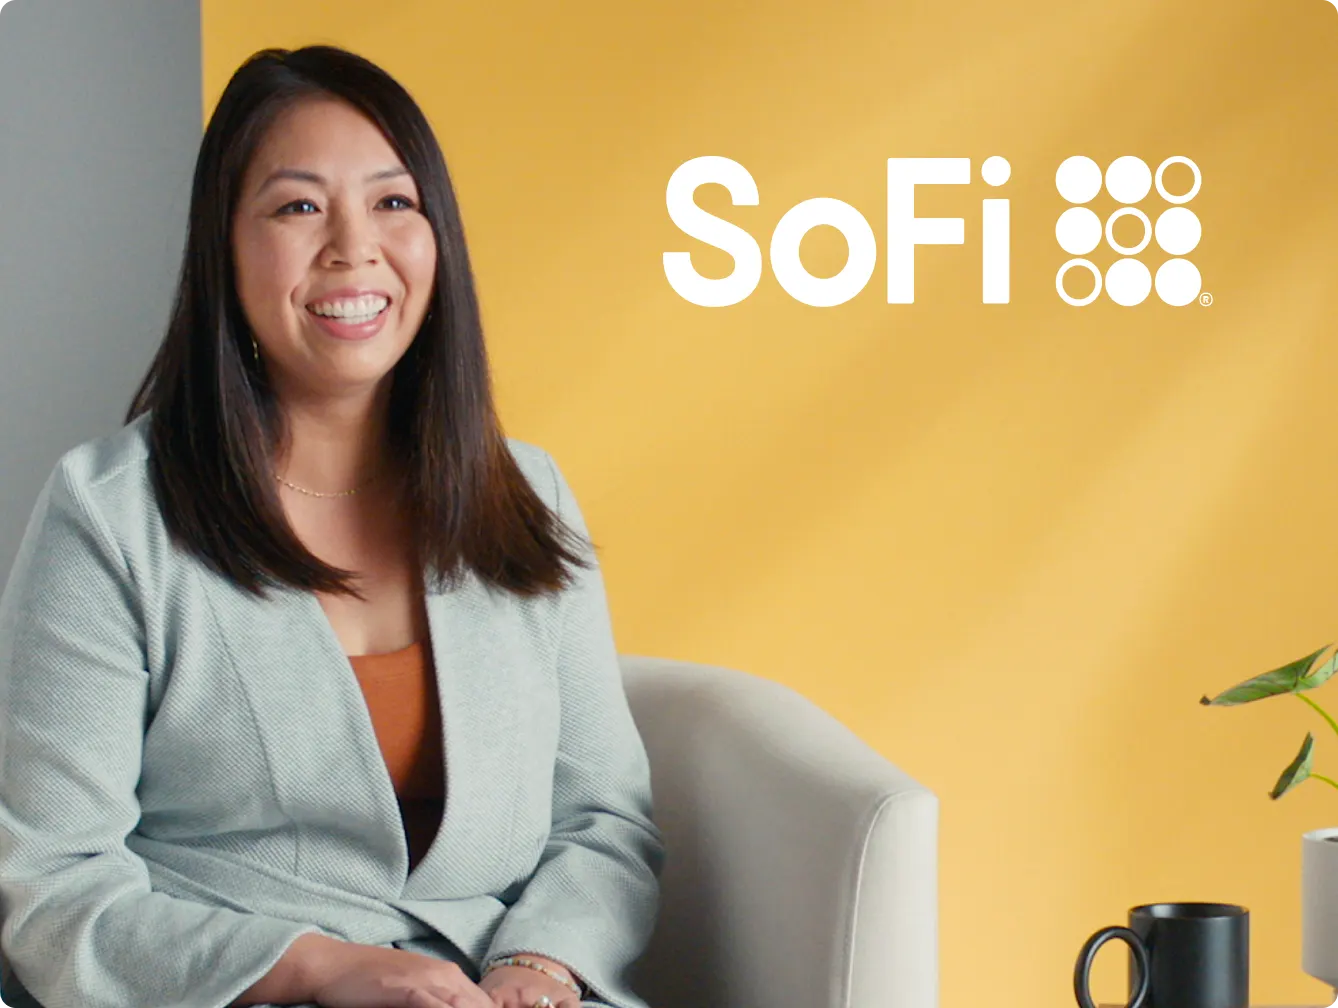 SoFi advertisement featuring a smiling woman with long dark hair, wearing a light gray blazer and an orange top, sitting on a chair. Next to her is a small table with a plant and a black mug. The SoFi logo is prominently displayed at the top right of the image on a yellow background.
